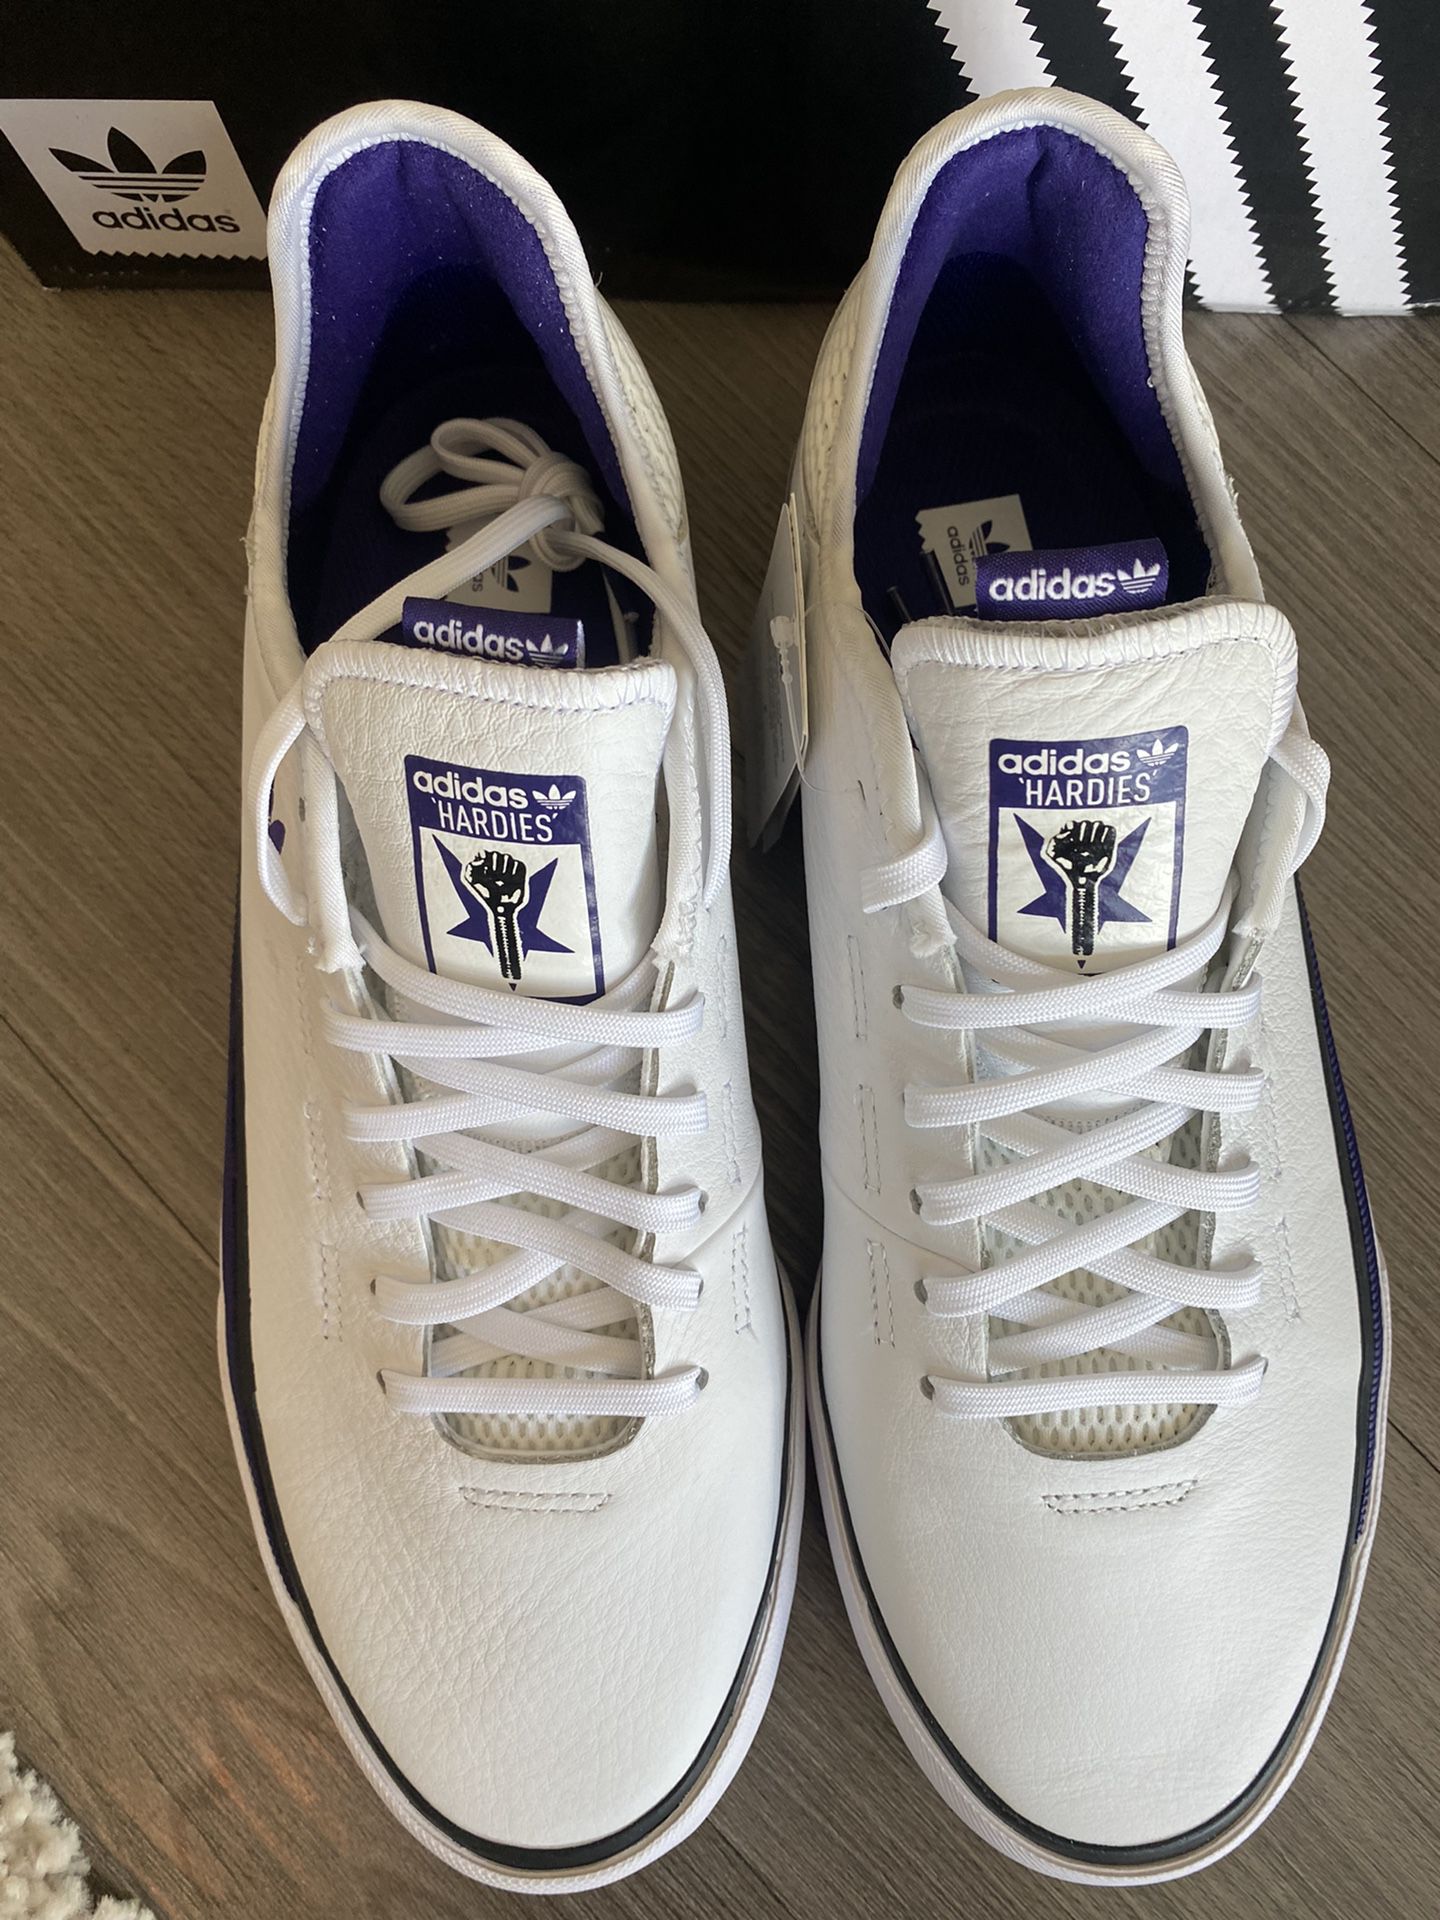 meer inval Onschuld ADIDAS SABALO X HARDIES WHITE/PURPLE MENS SIZE 9 for Sale in Los Angeles,  CA - OfferUp